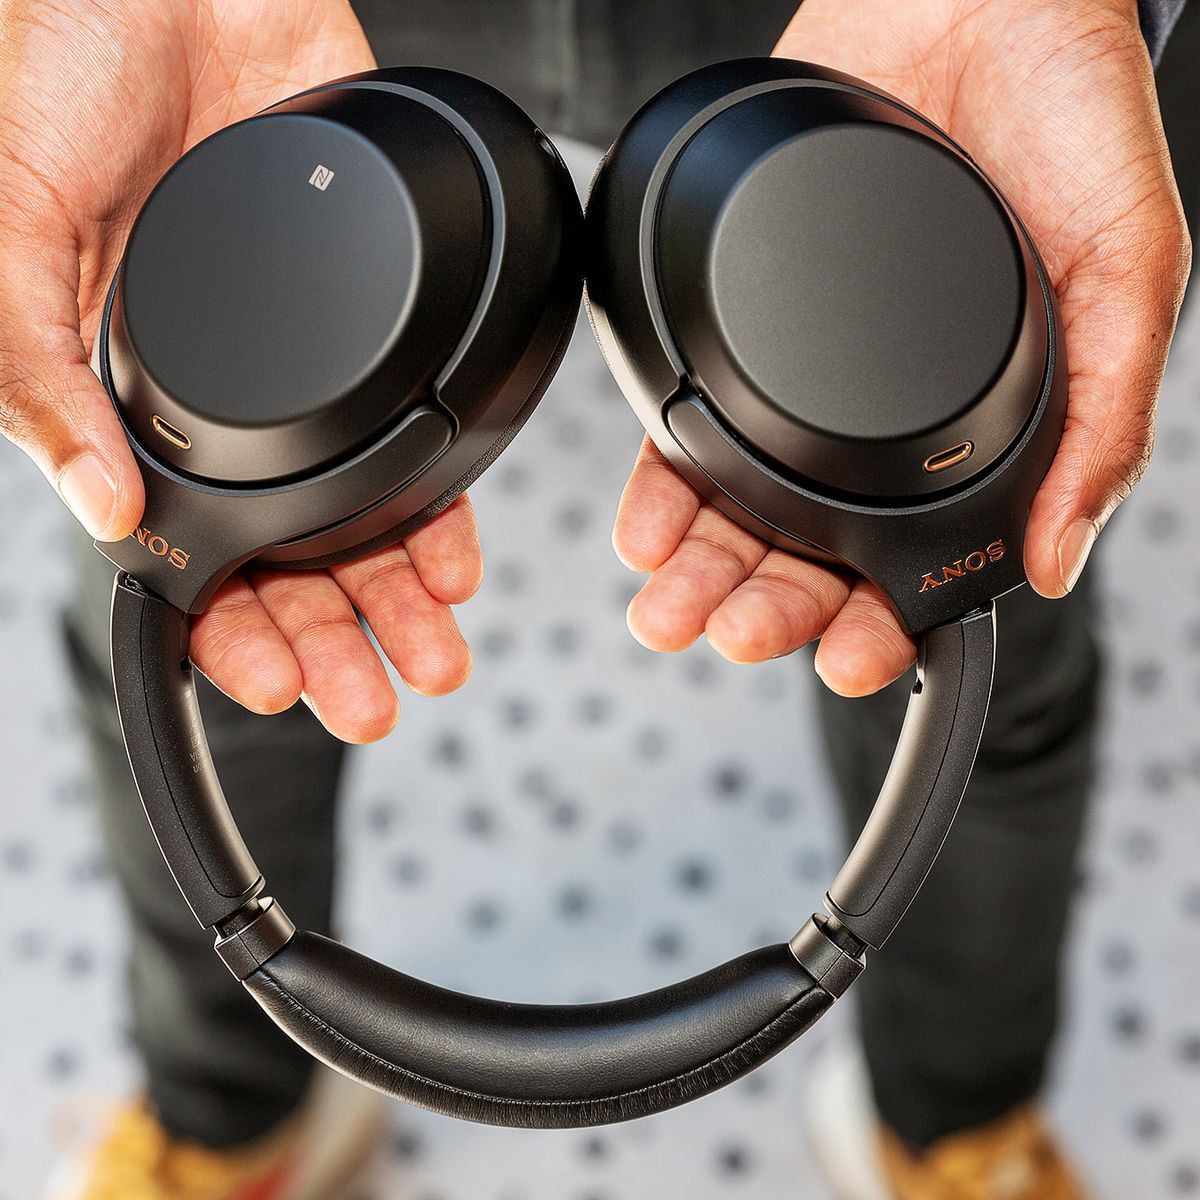 A photo of the Sony WH-1000XM3 headphones, the best noise-canceling headphones for most people.